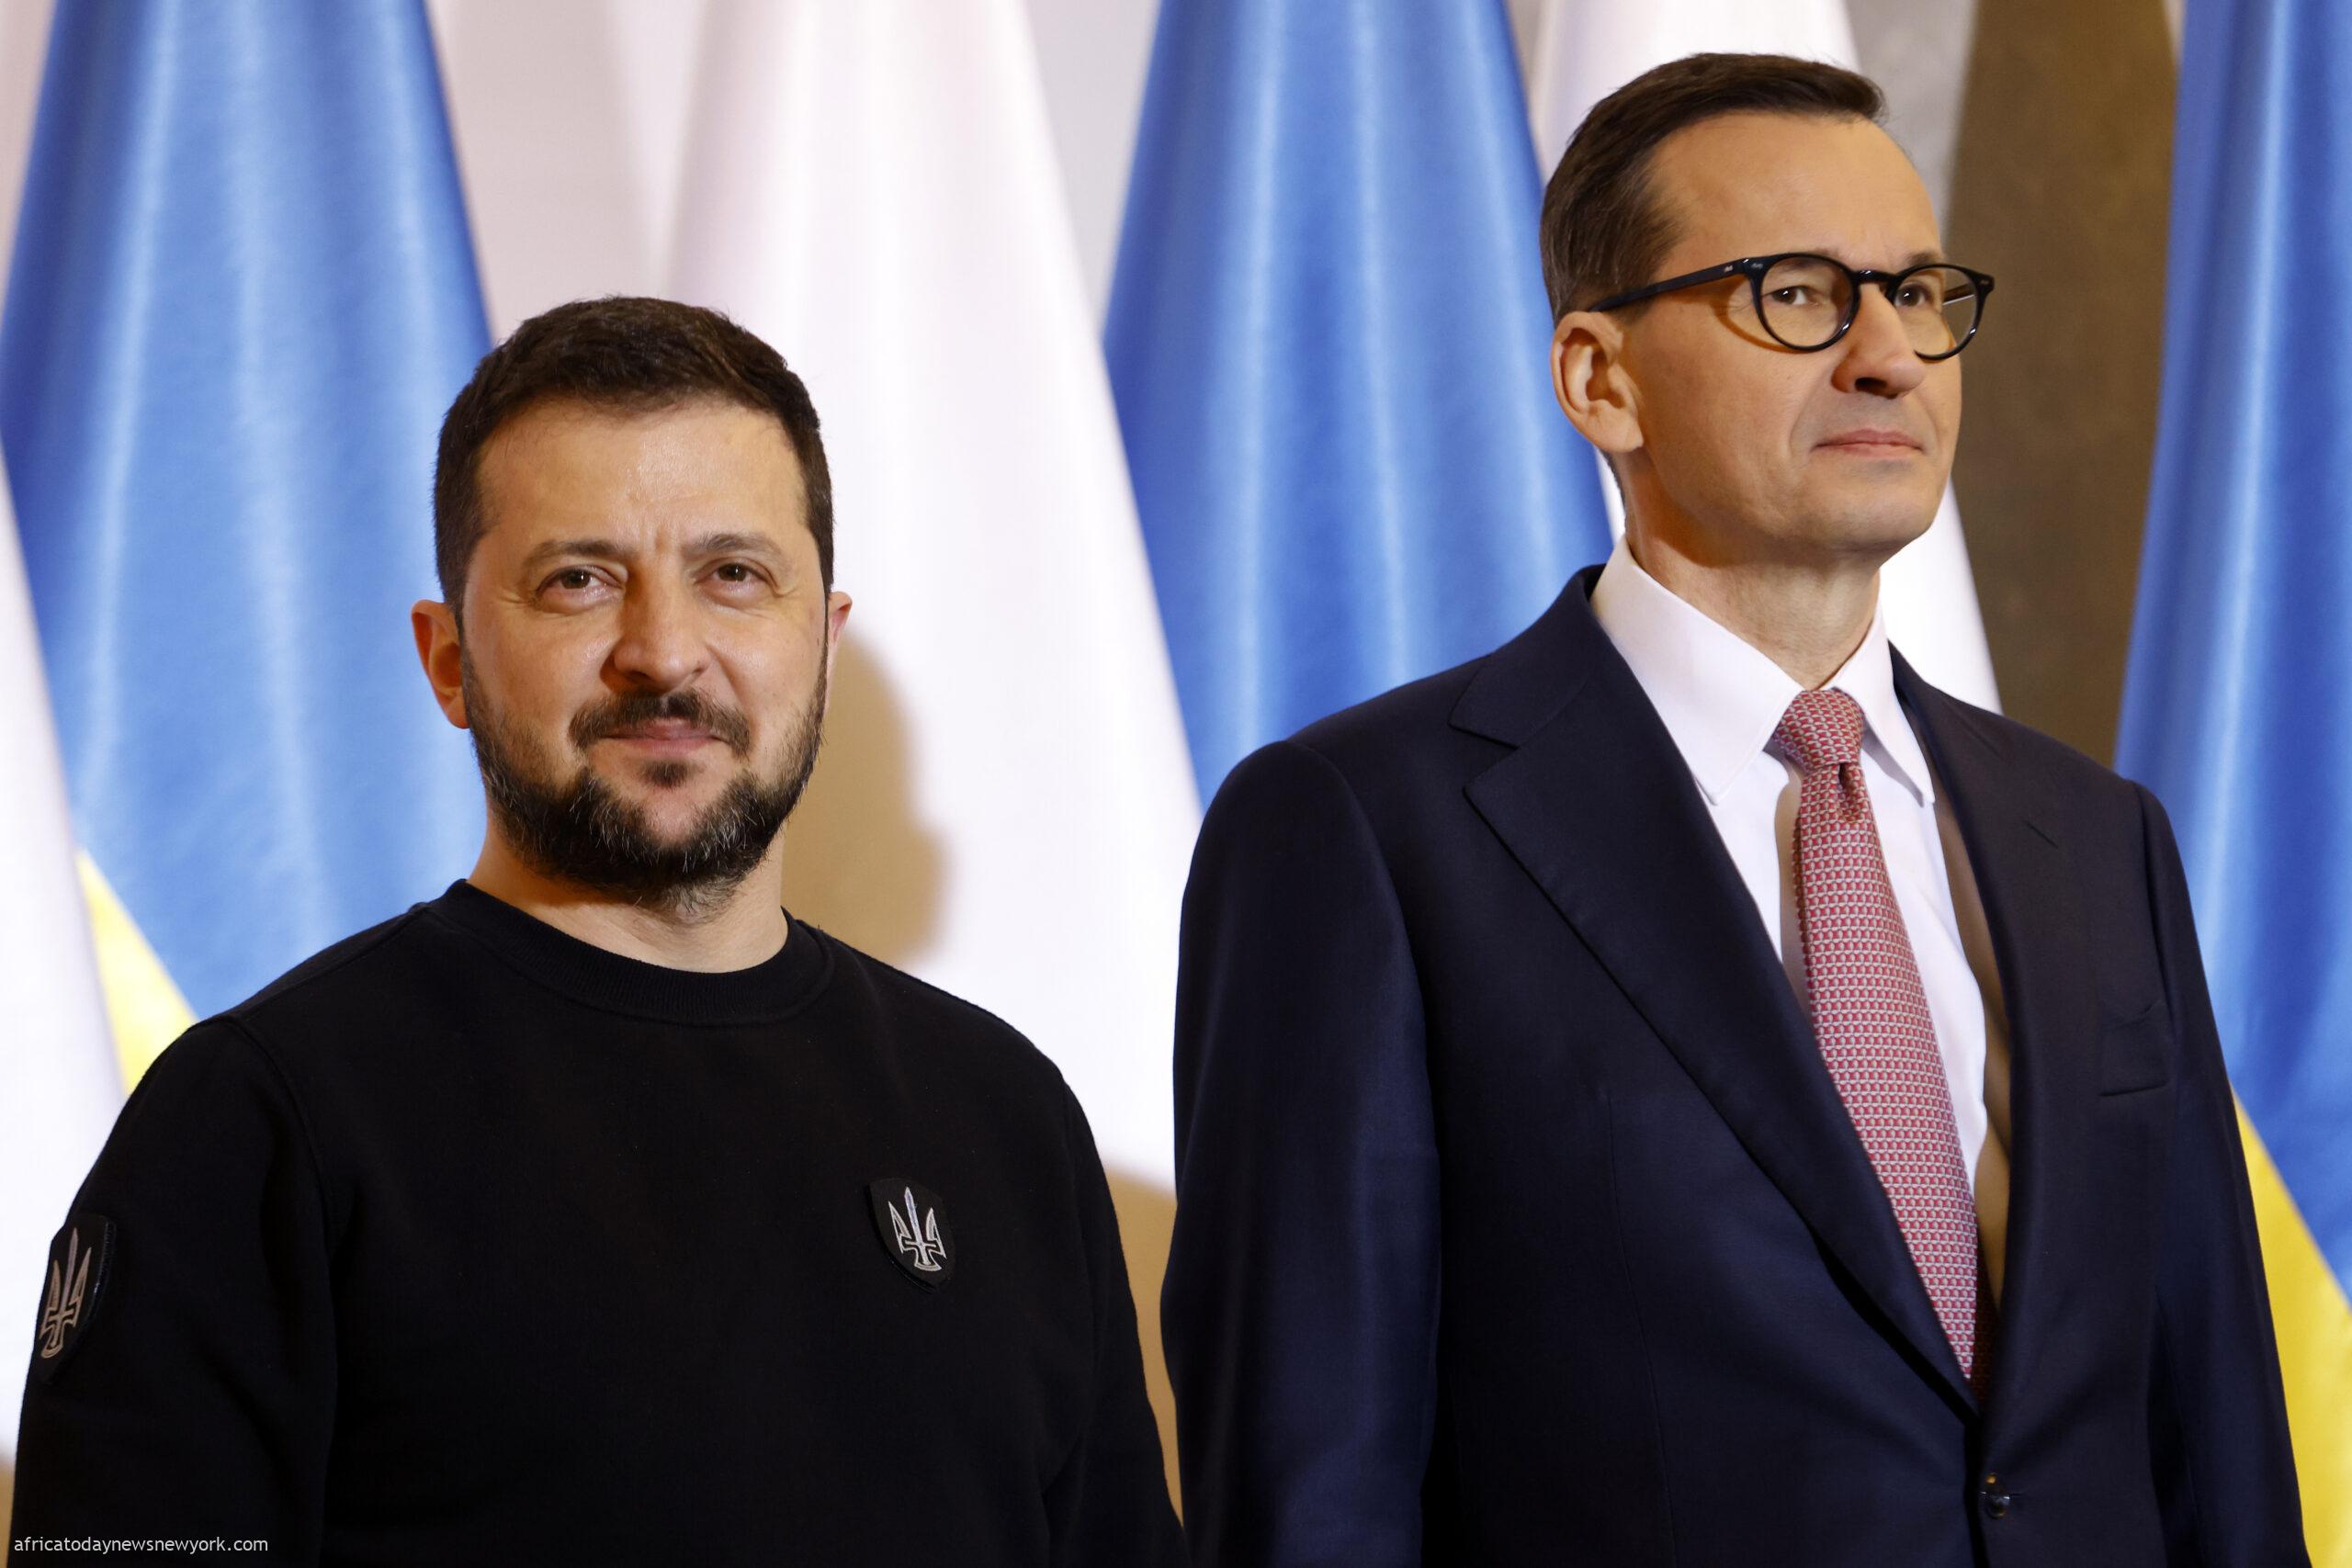 'Never Insult’ My People Again, Poland’s PM Warns Zelenskyy